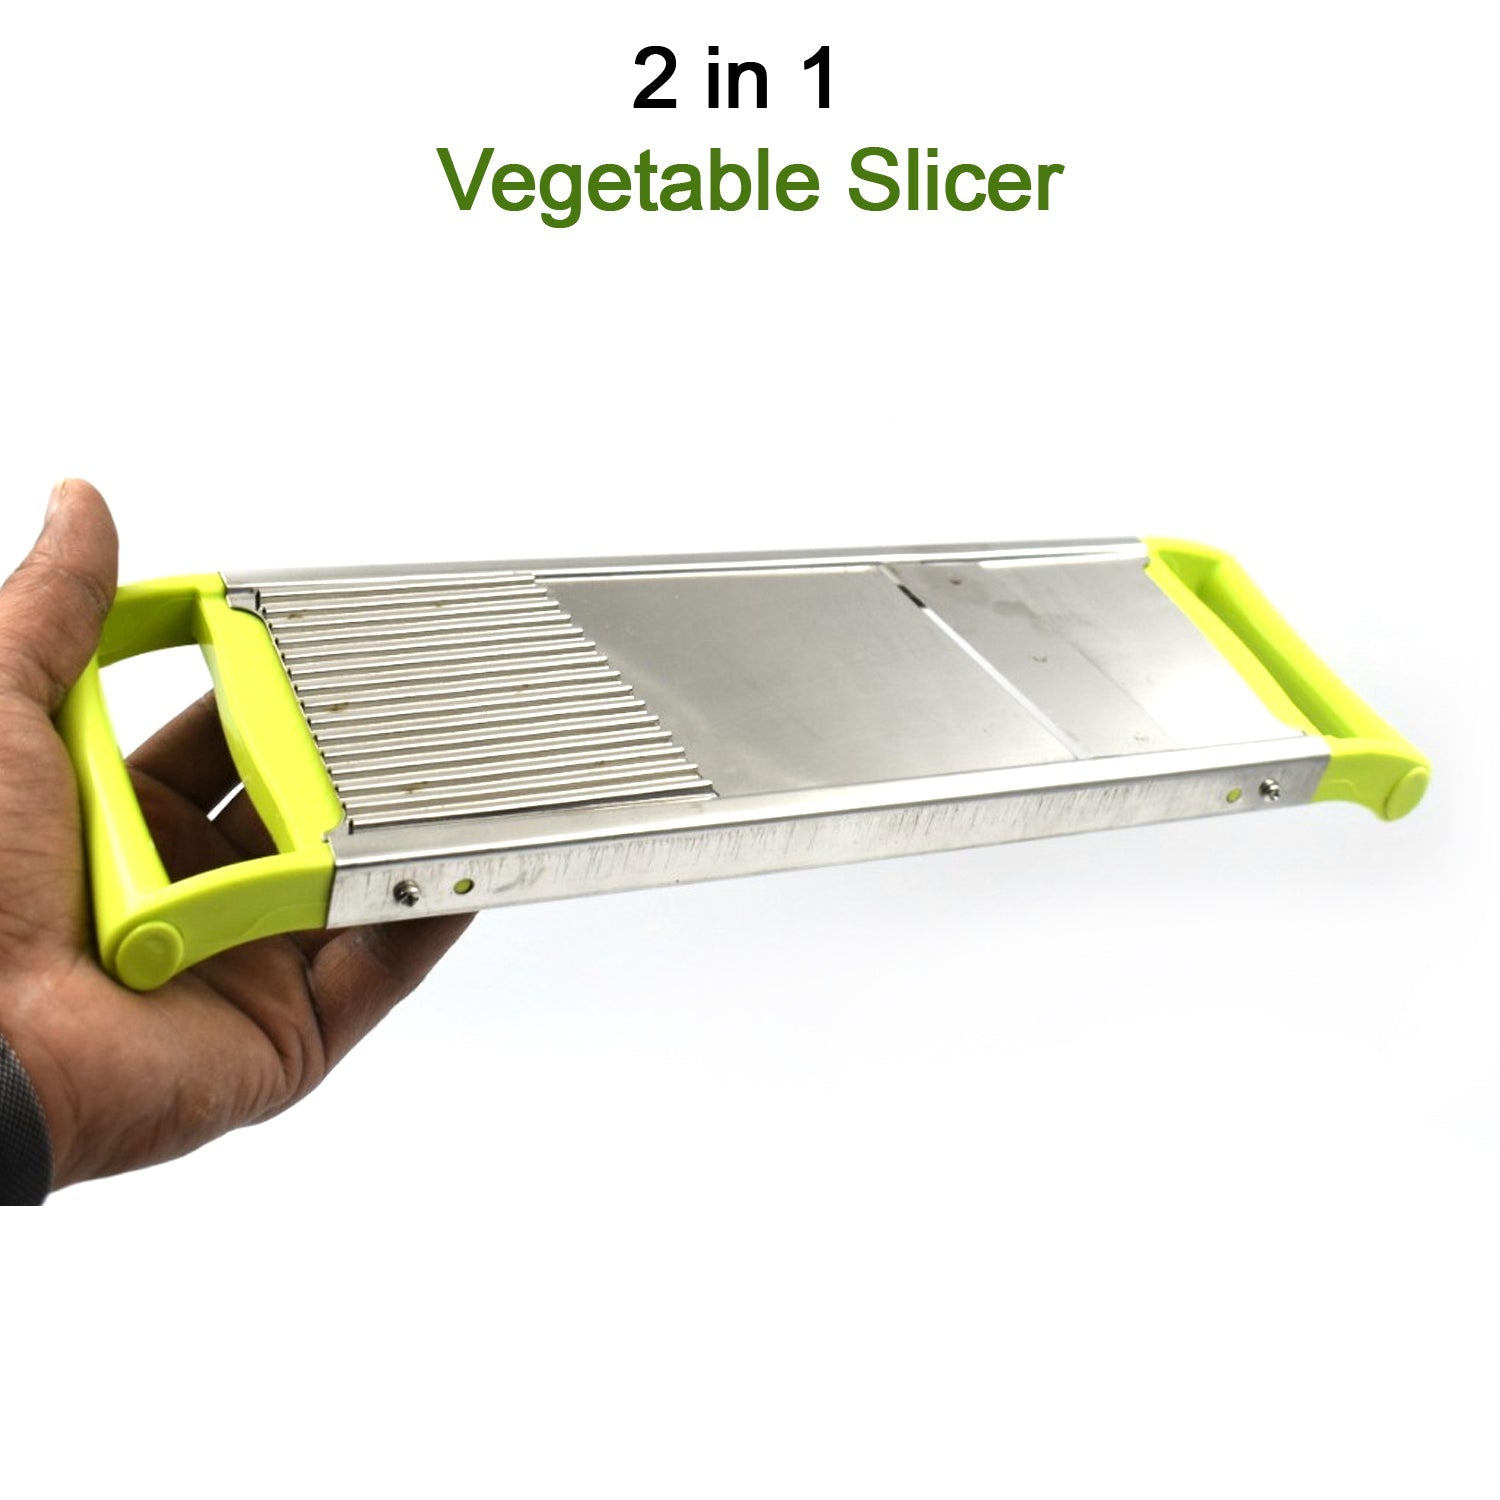 2688 2 in 1 Potato Slicer used in all kinds of household kitchen purposes for cutting and slicing of potatoes.